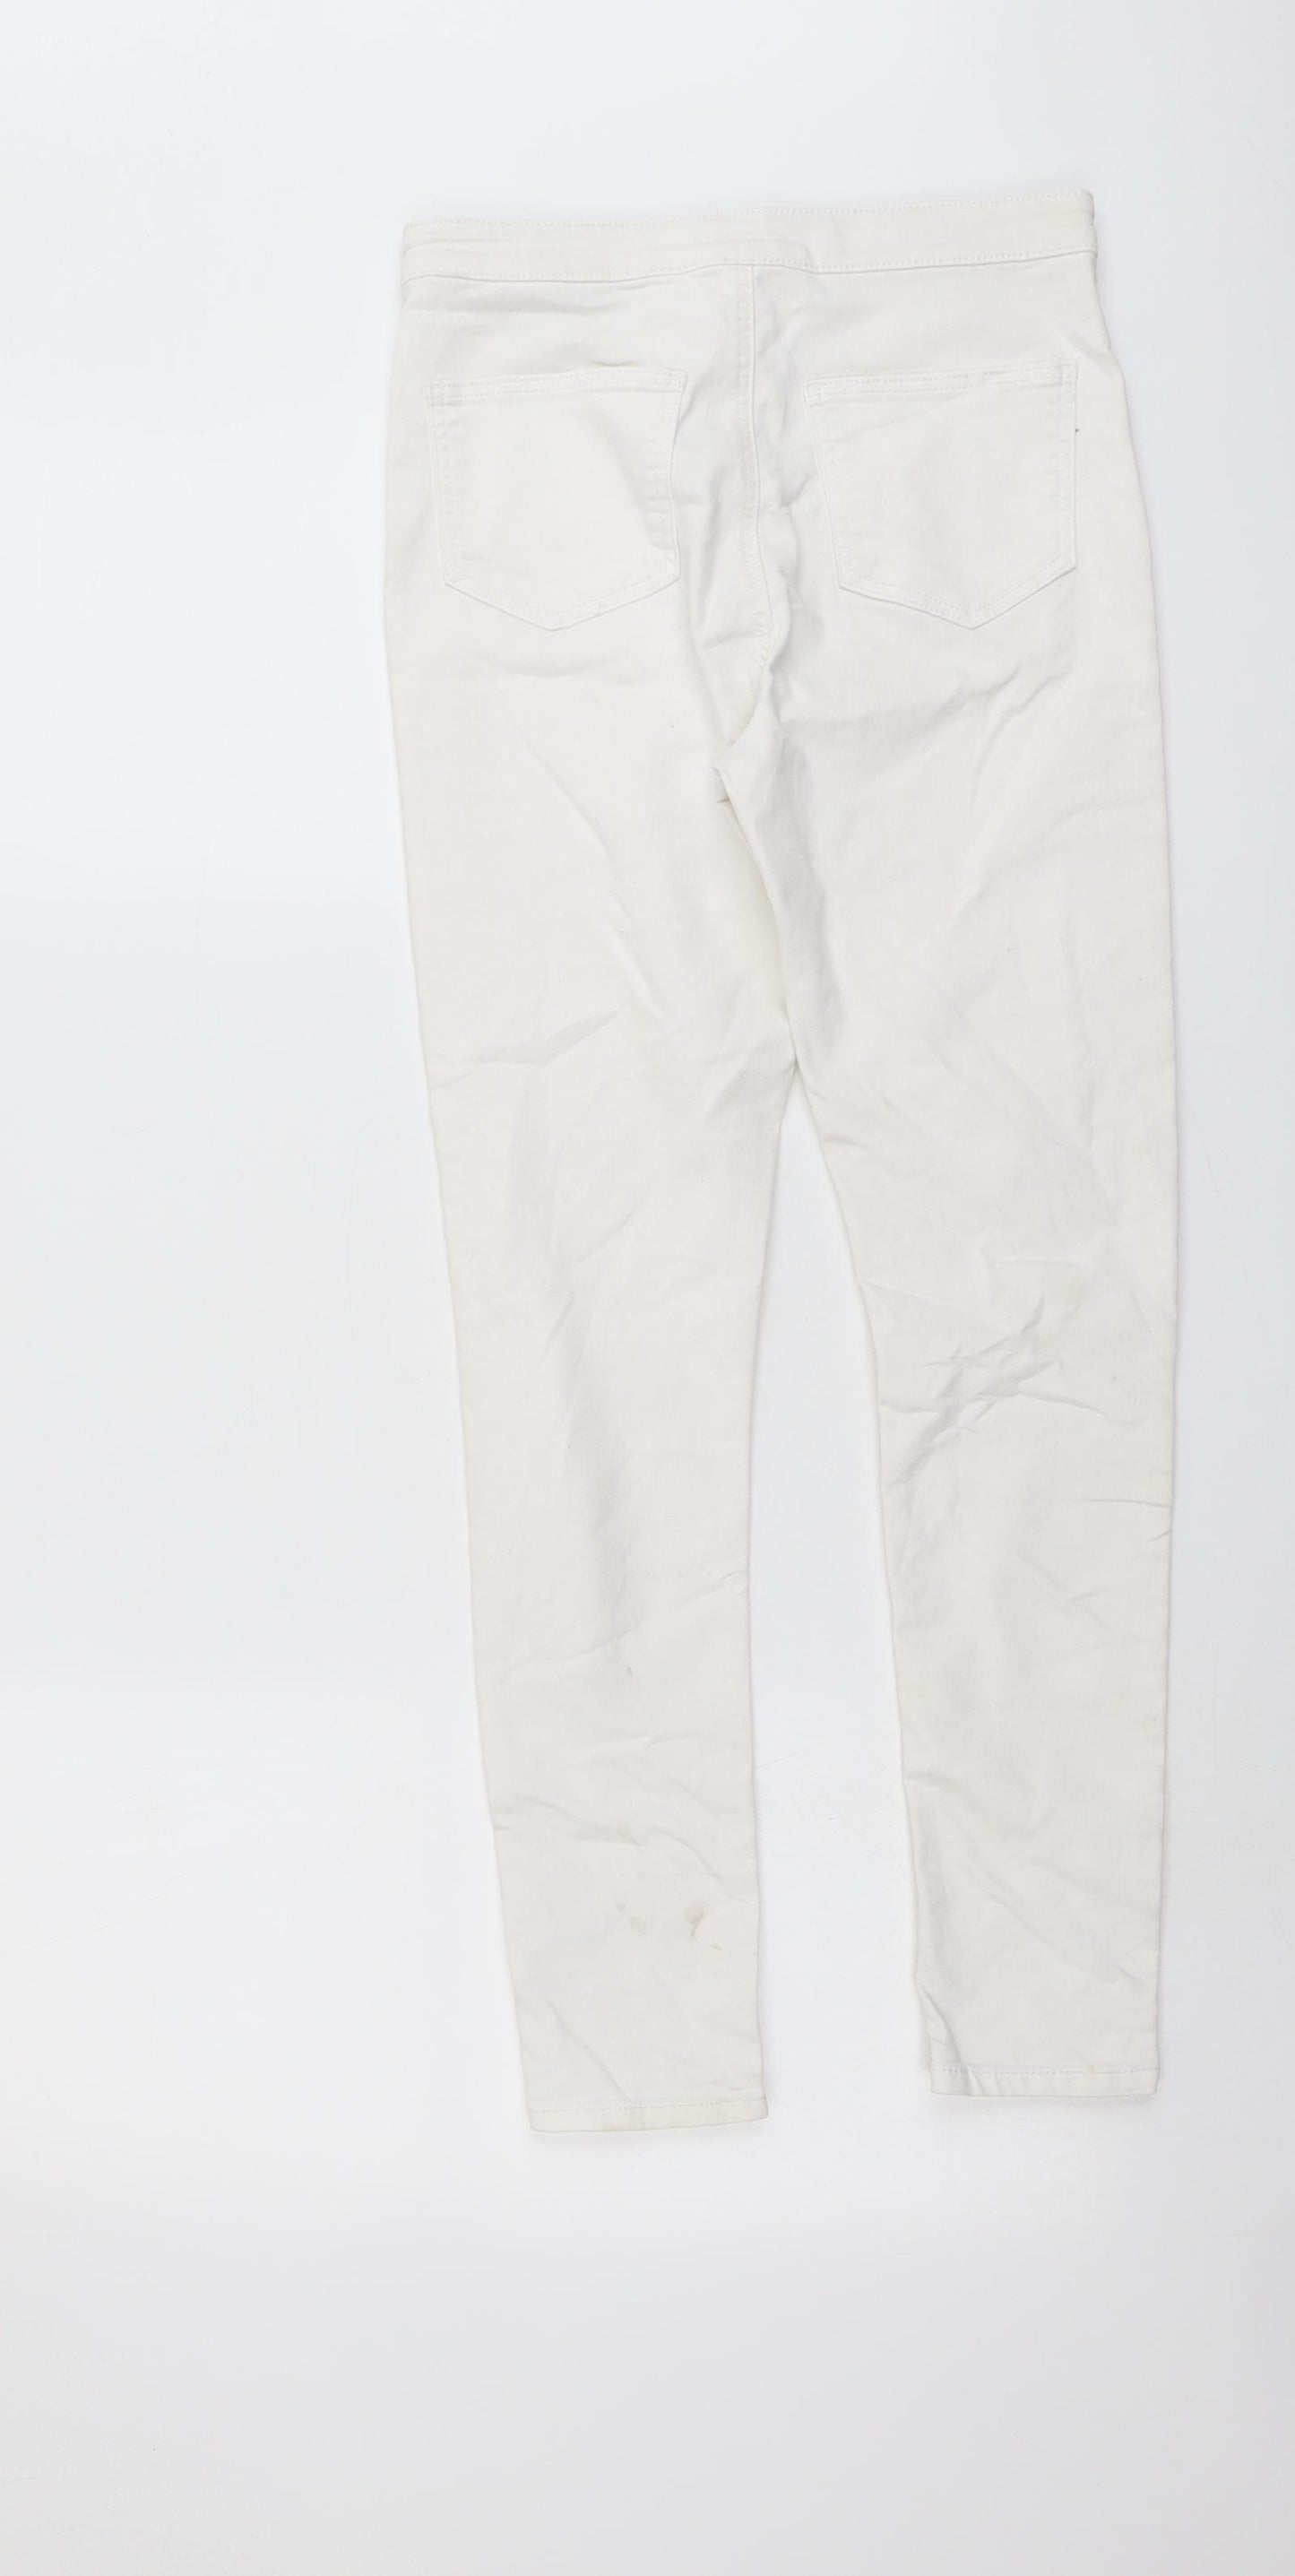 H&M Girls White Cotton Skinny Jeans Size 11-12 Years Regular Button